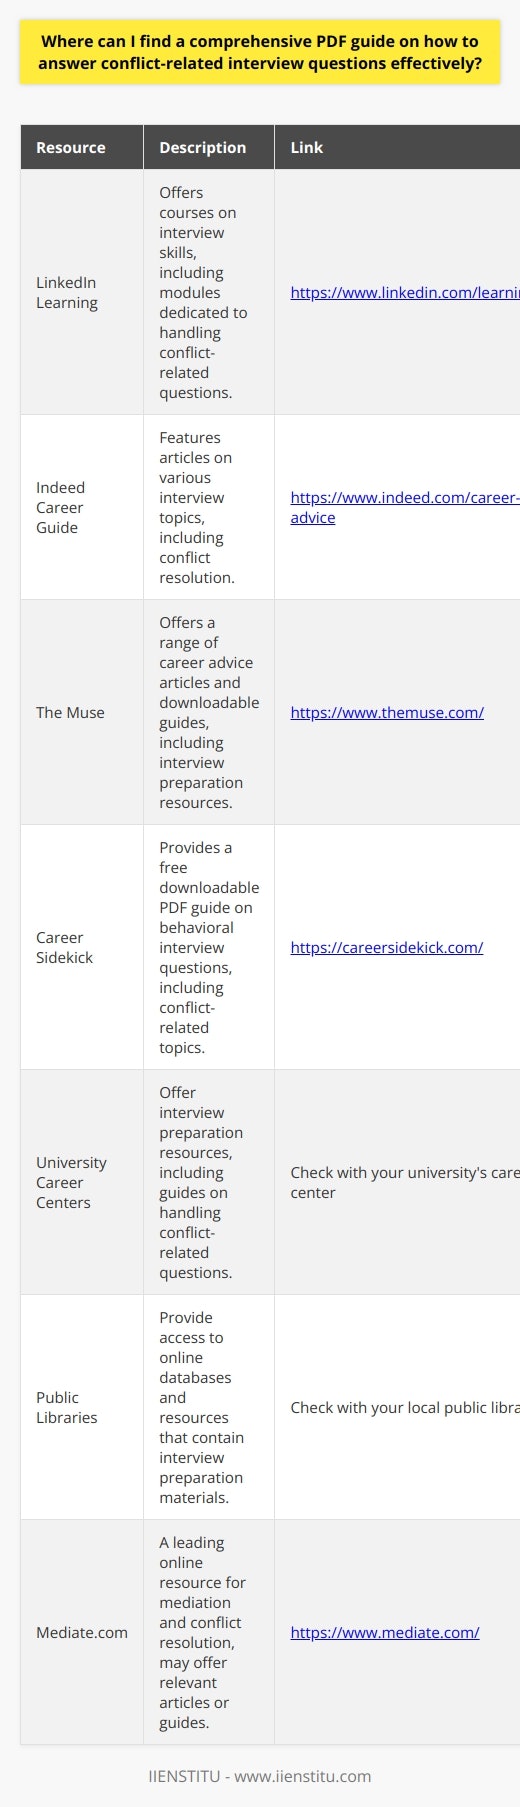 Finding a comprehensive PDF guide on effectively answering conflict-related interview questions can be challenging. However, several online resources offer valuable information and tips to help job seekers navigate this crucial aspect of the interview process. Online Job Search Platforms Websites like LinkedIn, Indeed, and Glassdoor often feature articles and guides written by career experts. These resources provide insights into common conflict-related interview questions and offer strategies for crafting compelling responses. LinkedIn LinkedIn Learning offers courses on interview skills, including modules dedicated to handling conflict-related questions. Users can access these courses with a subscription or take advantage of the platforms free trial period. Indeed Indeeds Career Guide section features articles on various interview topics, including conflict resolution. Job seekers can find tips and examples to help them prepare for conflict-related questions. Career Coaching Websites Professional career coaching websites often provide downloadable PDF guides and resources on interview preparation. These guides may include sections specifically addressing conflict-related questions and offer advice on how to frame responses effectively. The Muse The Muse offers a range of career advice articles and downloadable guides. Their interview preparation resources cover various topics, including how to handle conflict-related questions. Career Sidekick Career Sidekick provides a free downloadable PDF guide on behavioral interview questions, which often include conflict-related topics. The guide offers tips and examples to help job seekers craft compelling answers. Educational Institutions and Libraries Many universities and public libraries offer access to online databases and resources that contain interview preparation materials. These resources may include PDF guides and articles addressing conflict-related interview questions. University Career Centers University career centers often provide students and alumni with interview preparation resources, including guides on handling conflict-related questions. Check with your universitys career center to see if they offer downloadable PDF guides or online resources. Public Libraries Public libraries subscribe to online databases that contain career-related resources, such as interview preparation guides. Library cardholders can access these databases and search for materials on conflict-related interview questions. Conflict Resolution Organizations Organizations specializing in conflict resolution may offer resources and guides on applying conflict resolution skills to interview situations. These resources can provide valuable insights and strategies for addressing conflict-related questions. Mediate.com Mediate.com is a leading online resource for mediation and conflict resolution. While primarily focused on professional development for mediators, the site may offer articles or guides relevant to job seekers preparing for conflict-related interview questions. By exploring these various resources, job seekers can find comprehensive PDF guides and valuable information on effectively answering conflict-related interview questions. Its essential to invest time in preparing for these questions to demonstrate your ability to handle conflicts professionally and constructively.